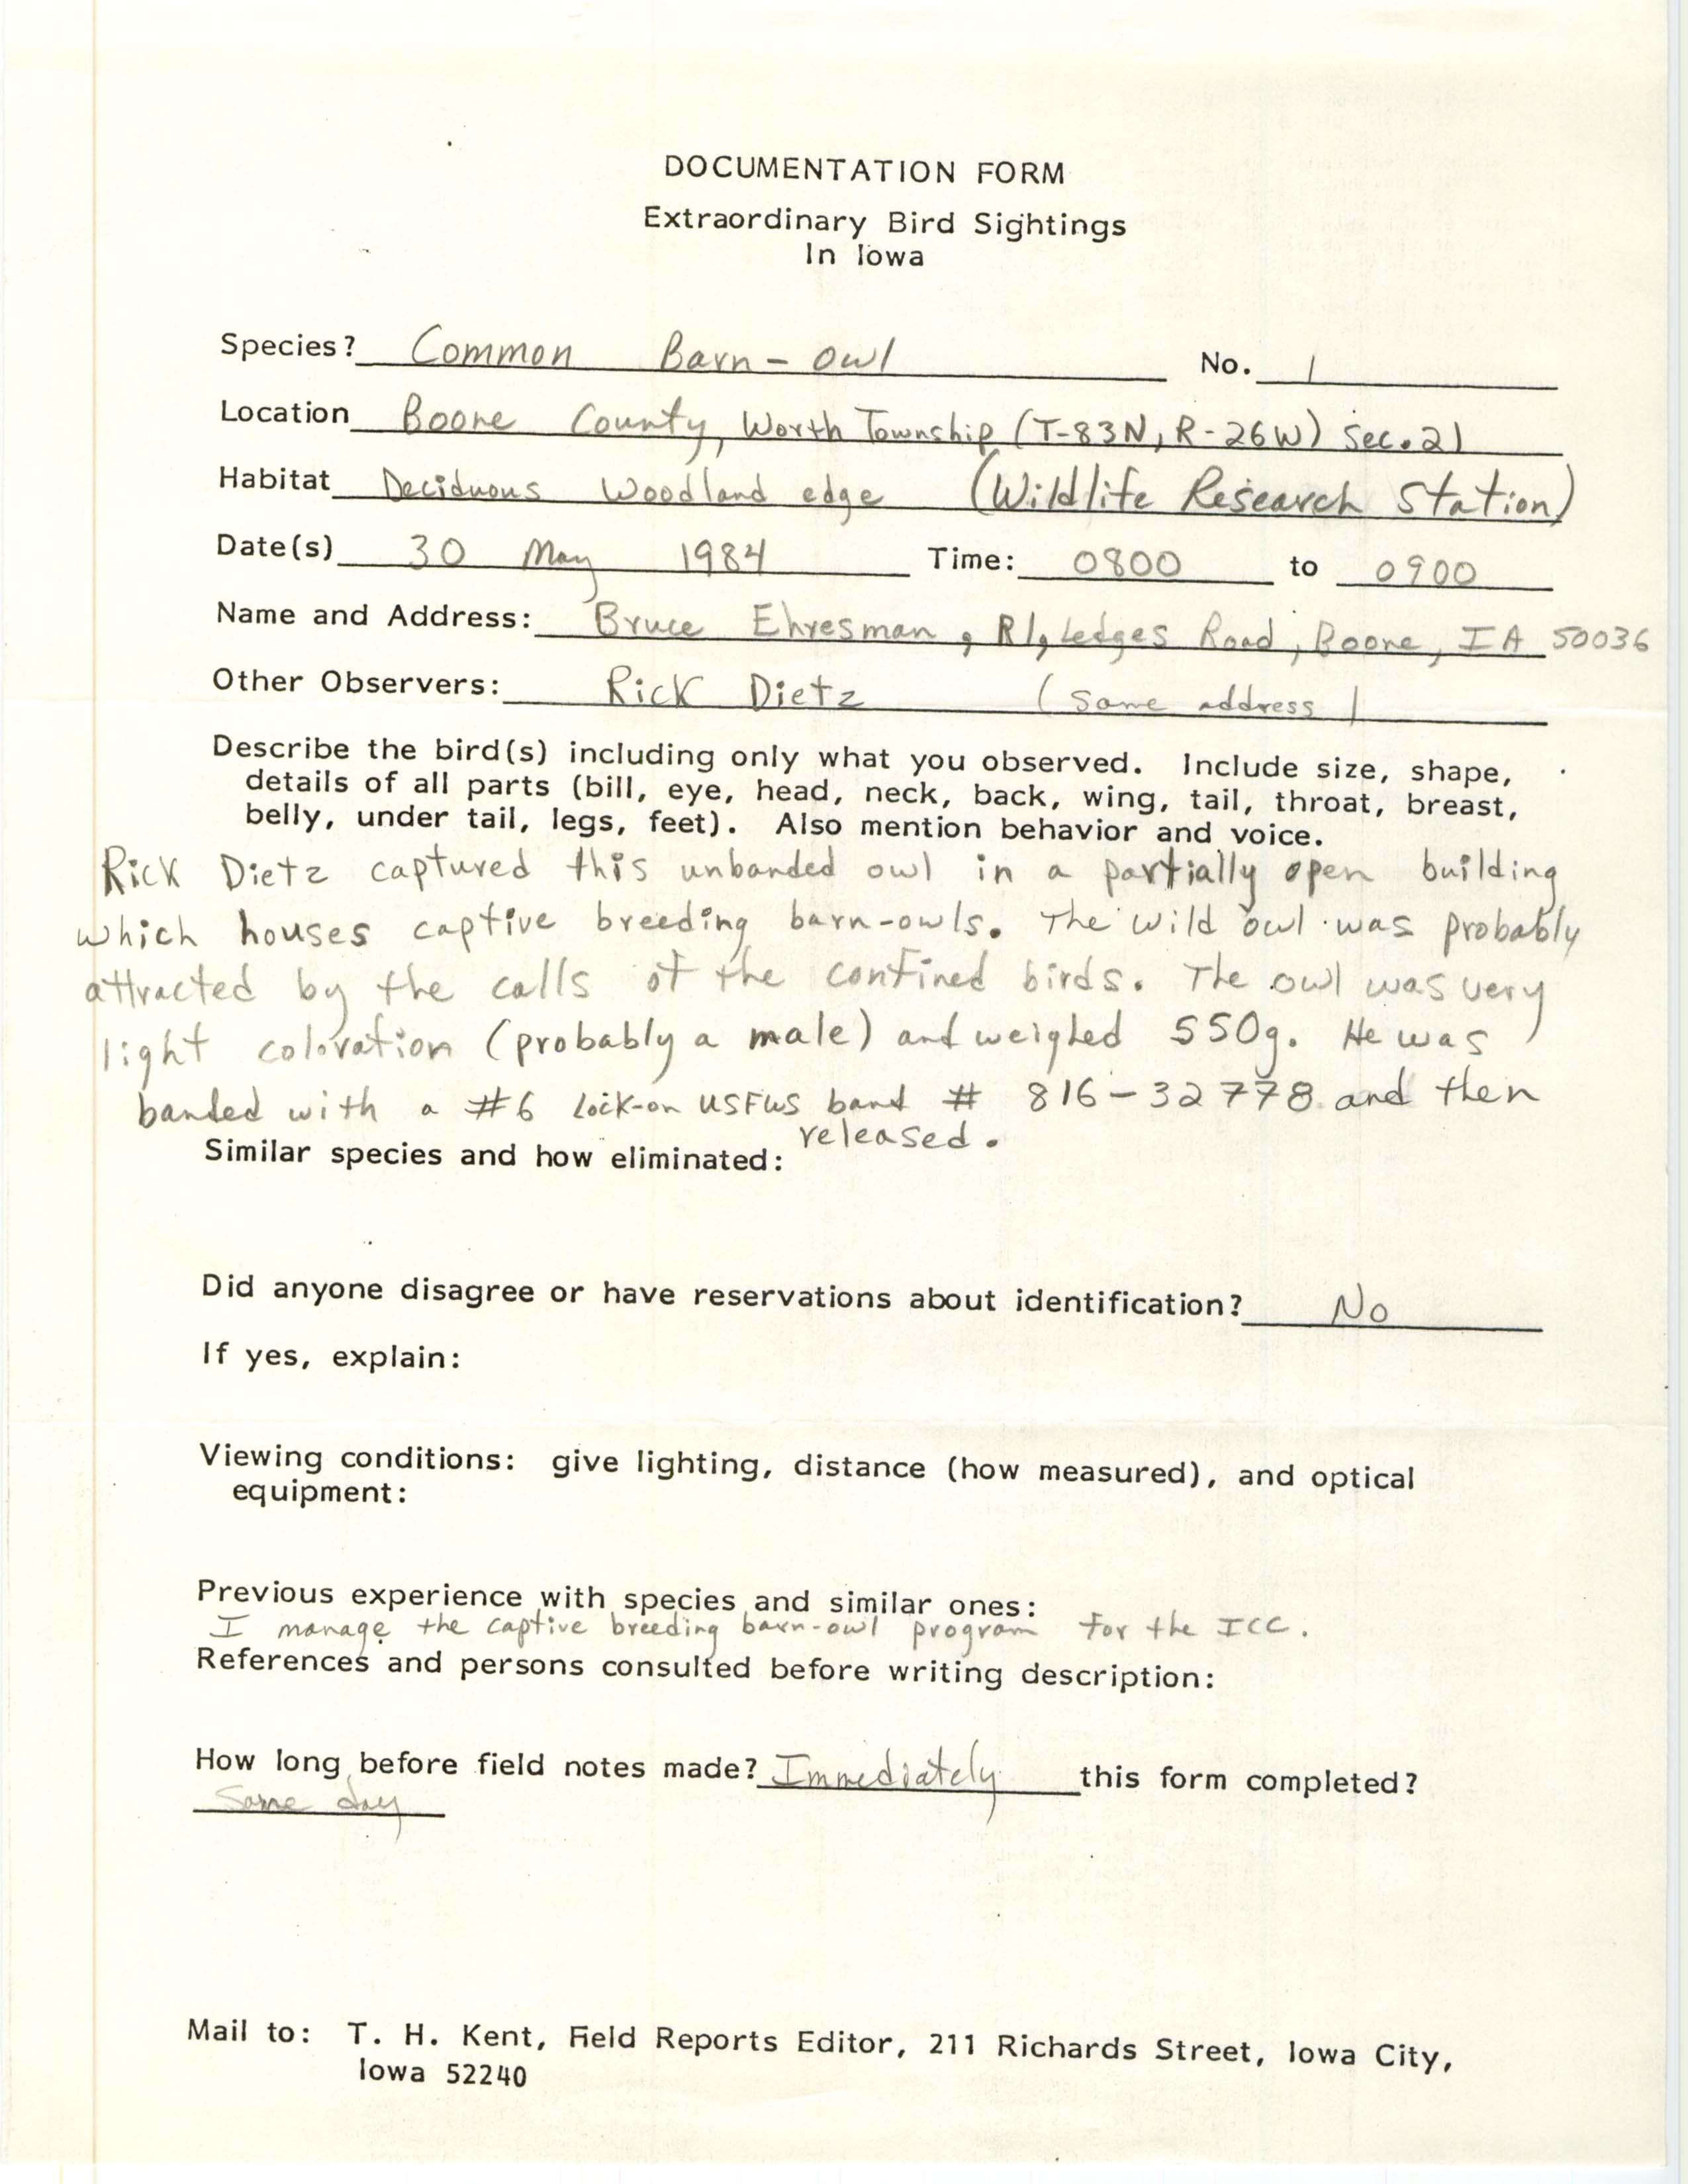 Rare bird documentation form for Common Barn Owl at Worth Township in Boone County, 1984